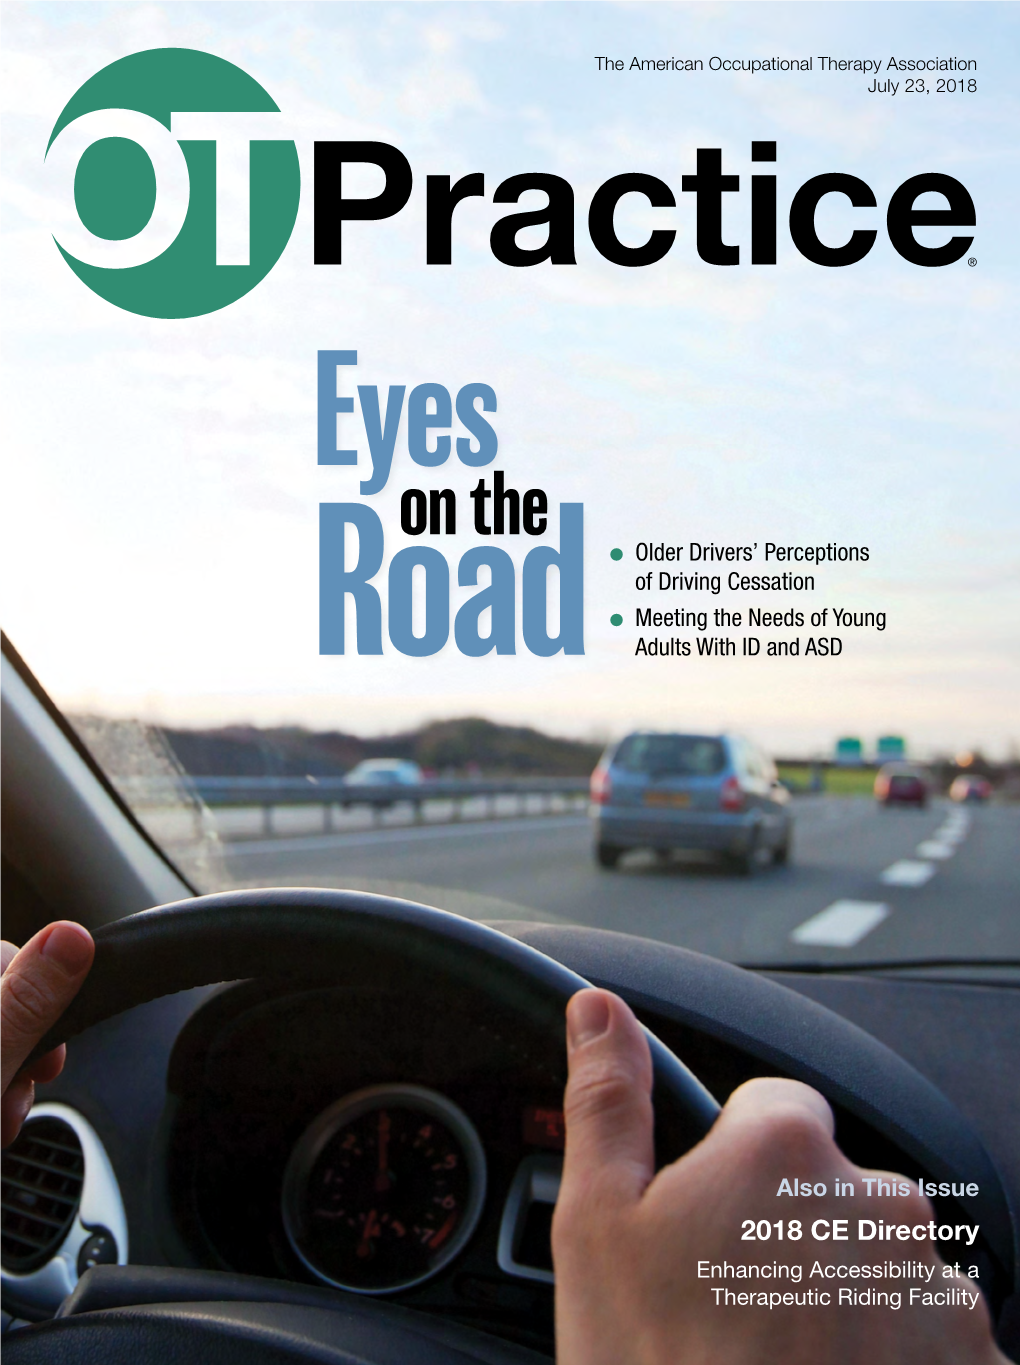 Practice® Eyes on the L Older Drivers’ Perceptions of Driving Cessation L Meeting the Needs of Young Road Adults with ID and ASD